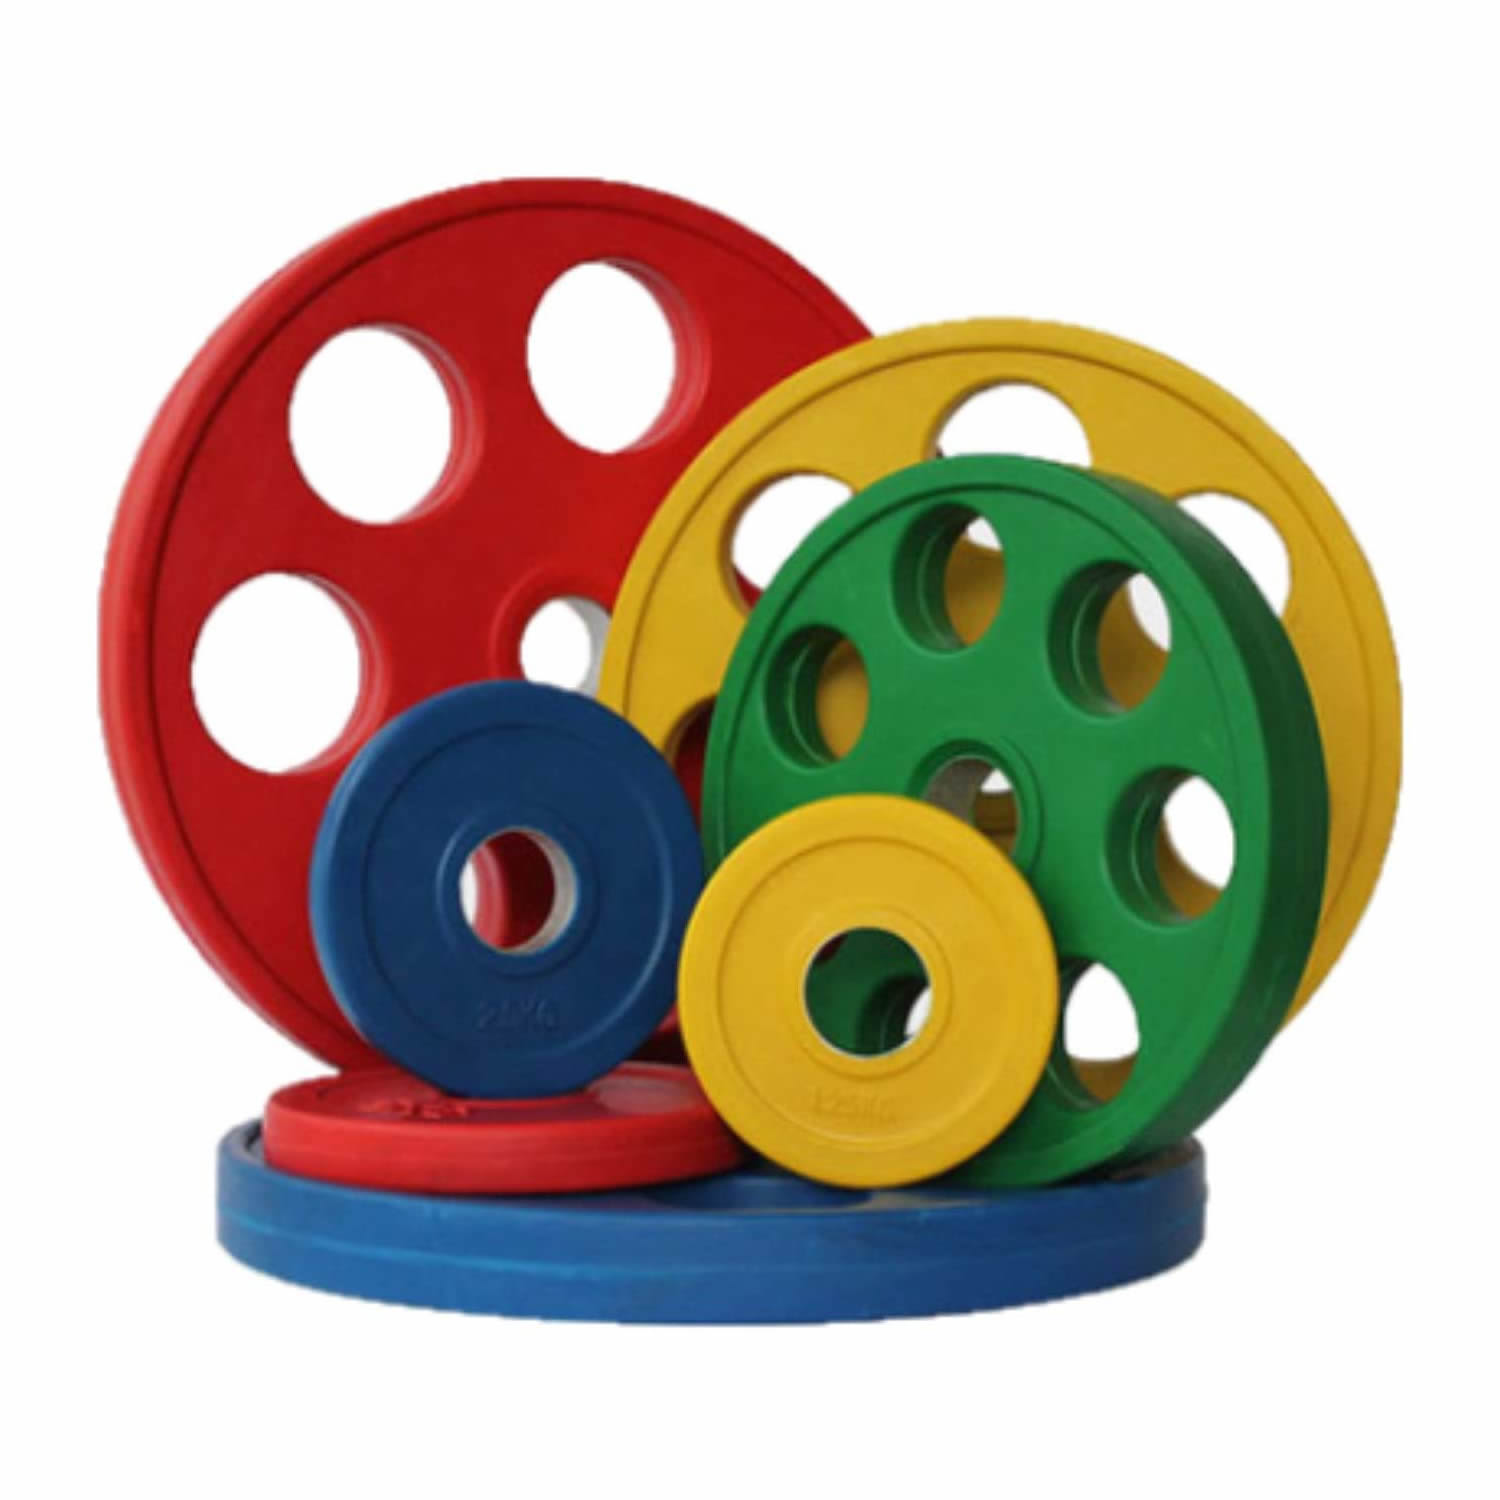 rubber weight plates